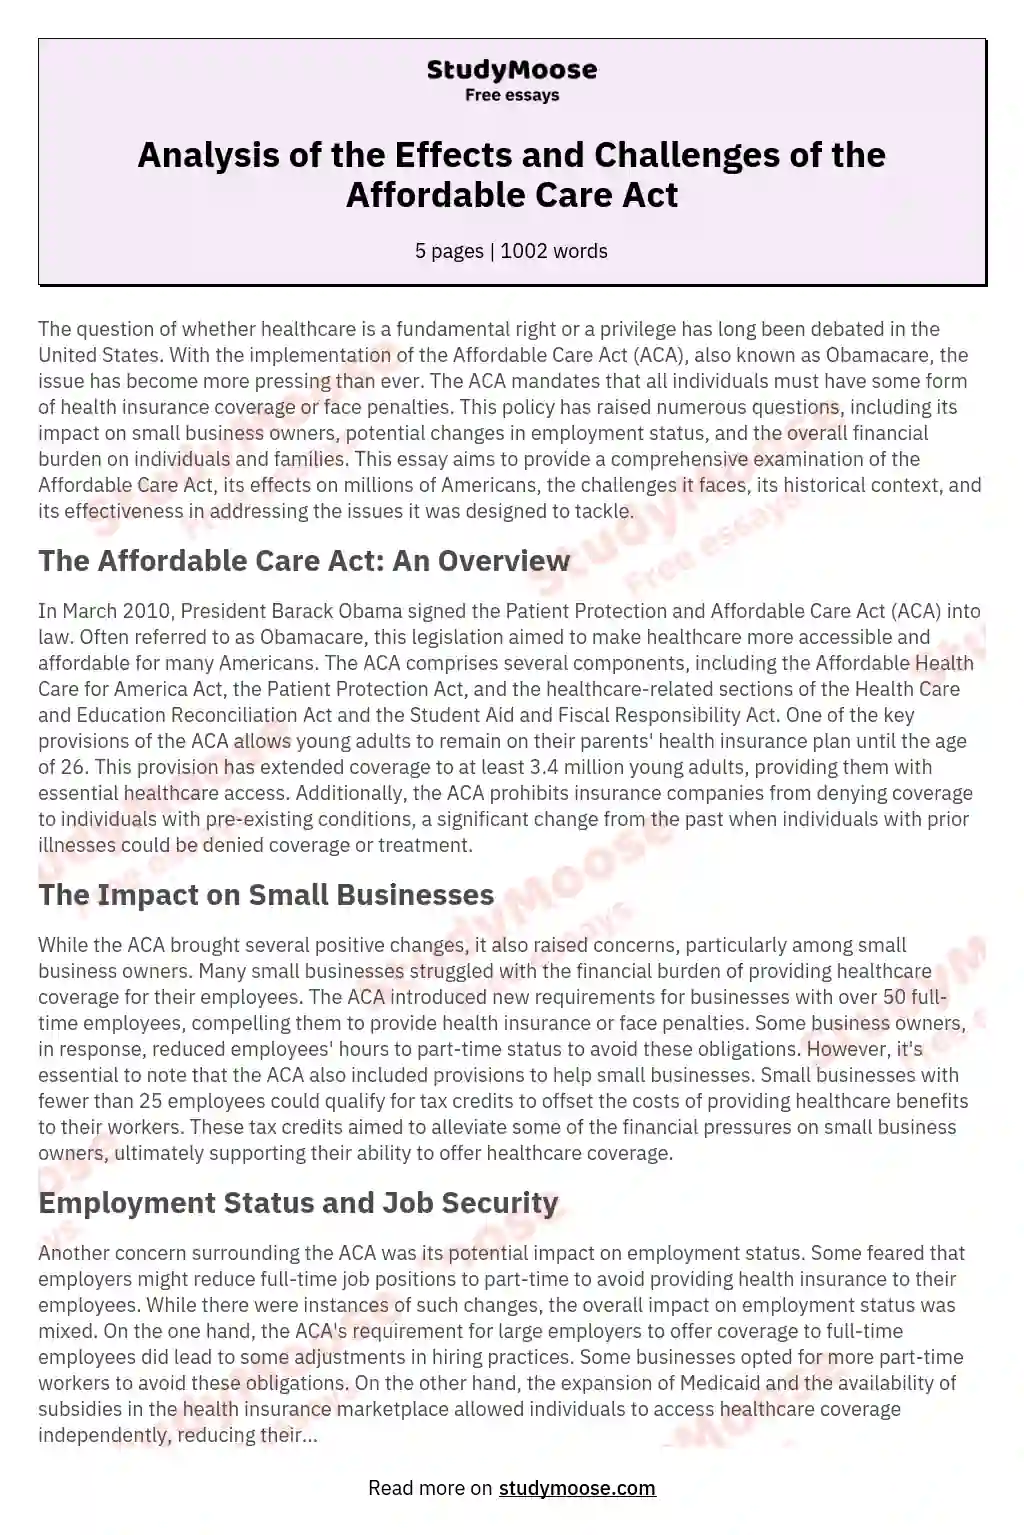 Analysis of the Effects and Challenges of the Affordable Care Act essay